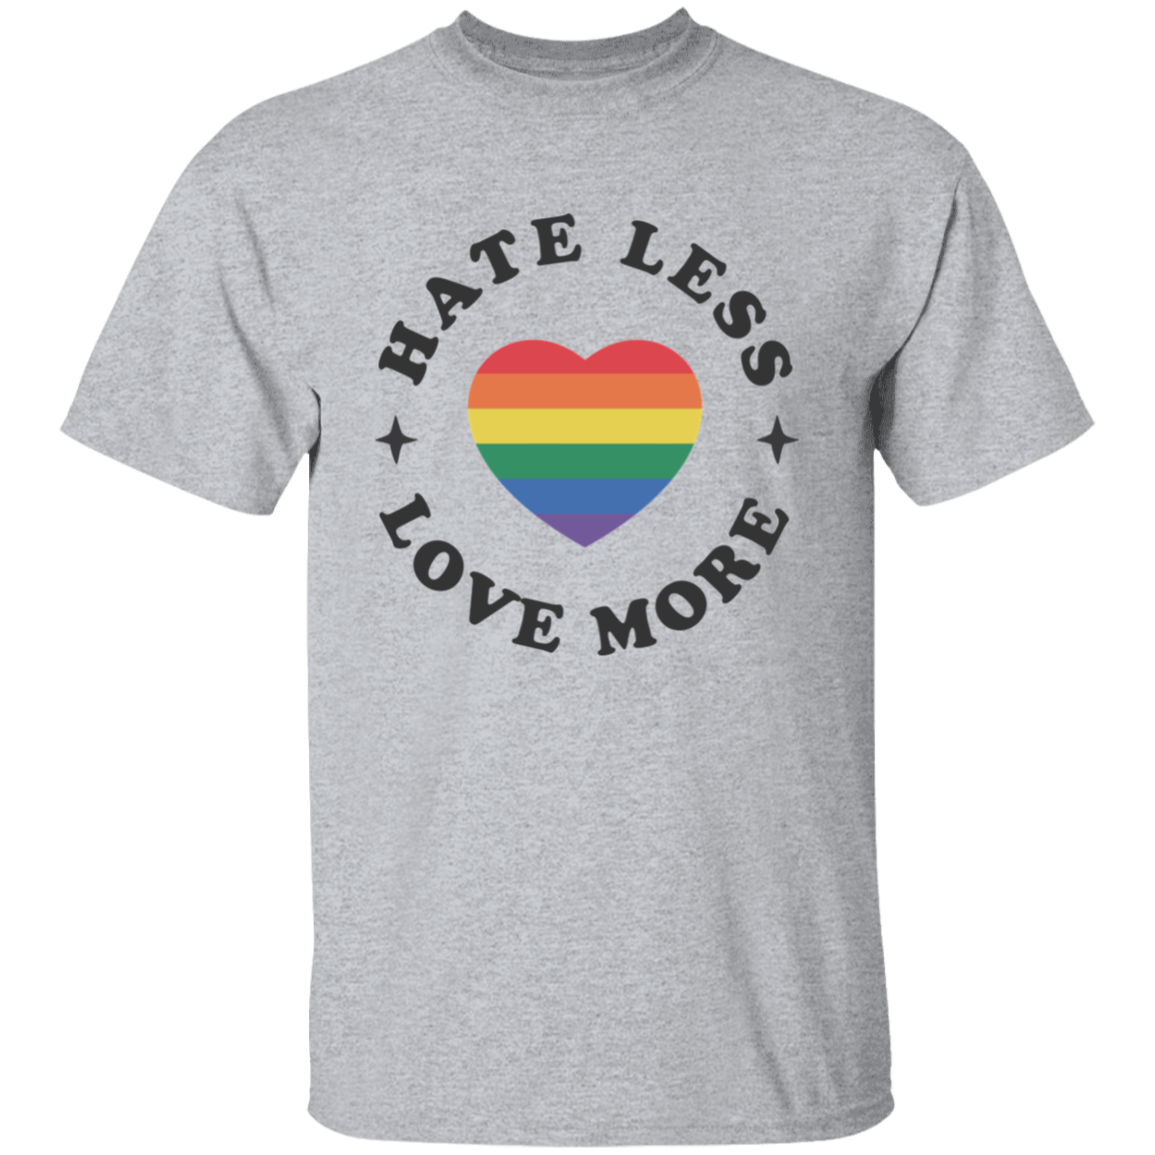 Hate Less Love More T-Shirt